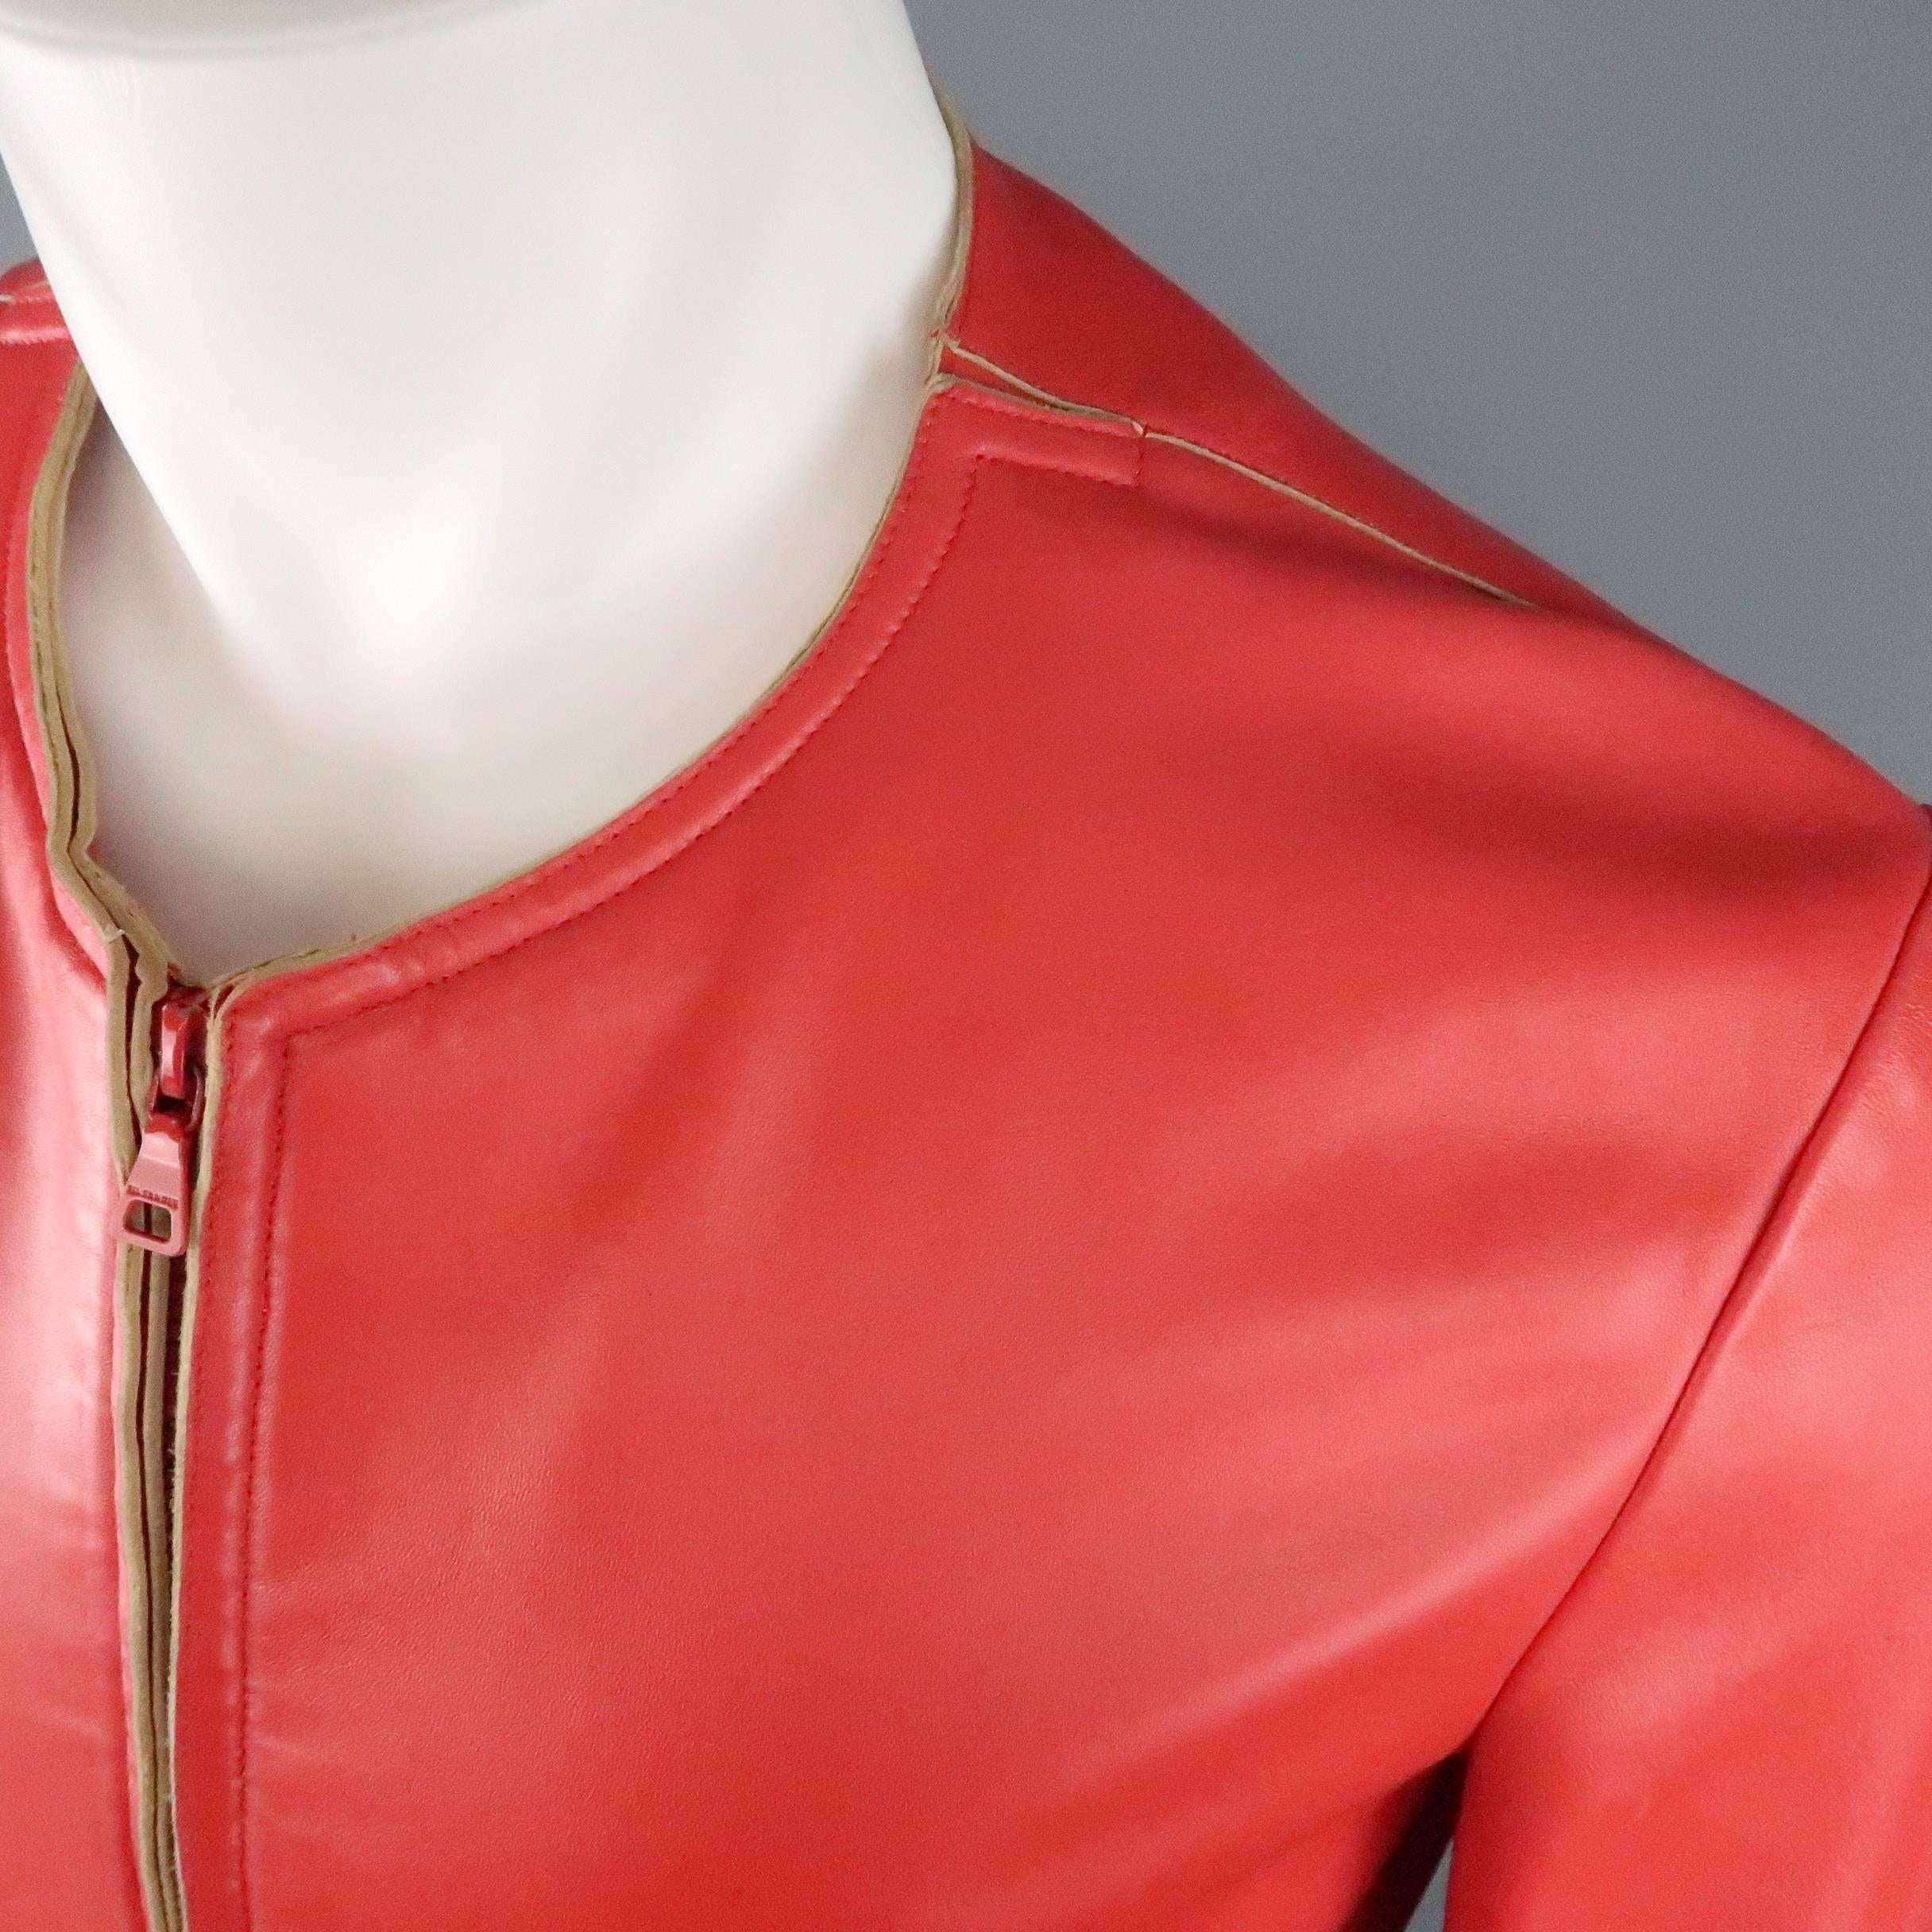 JIL SANDER jacket comes in a soft, light weight red leather and features a round, collarless neckline, red double zip front, slit pockets, and beige raw edge details. Some very small spots throughout leather. As-Is. Made In Italy.
 
Good Pre-Owned